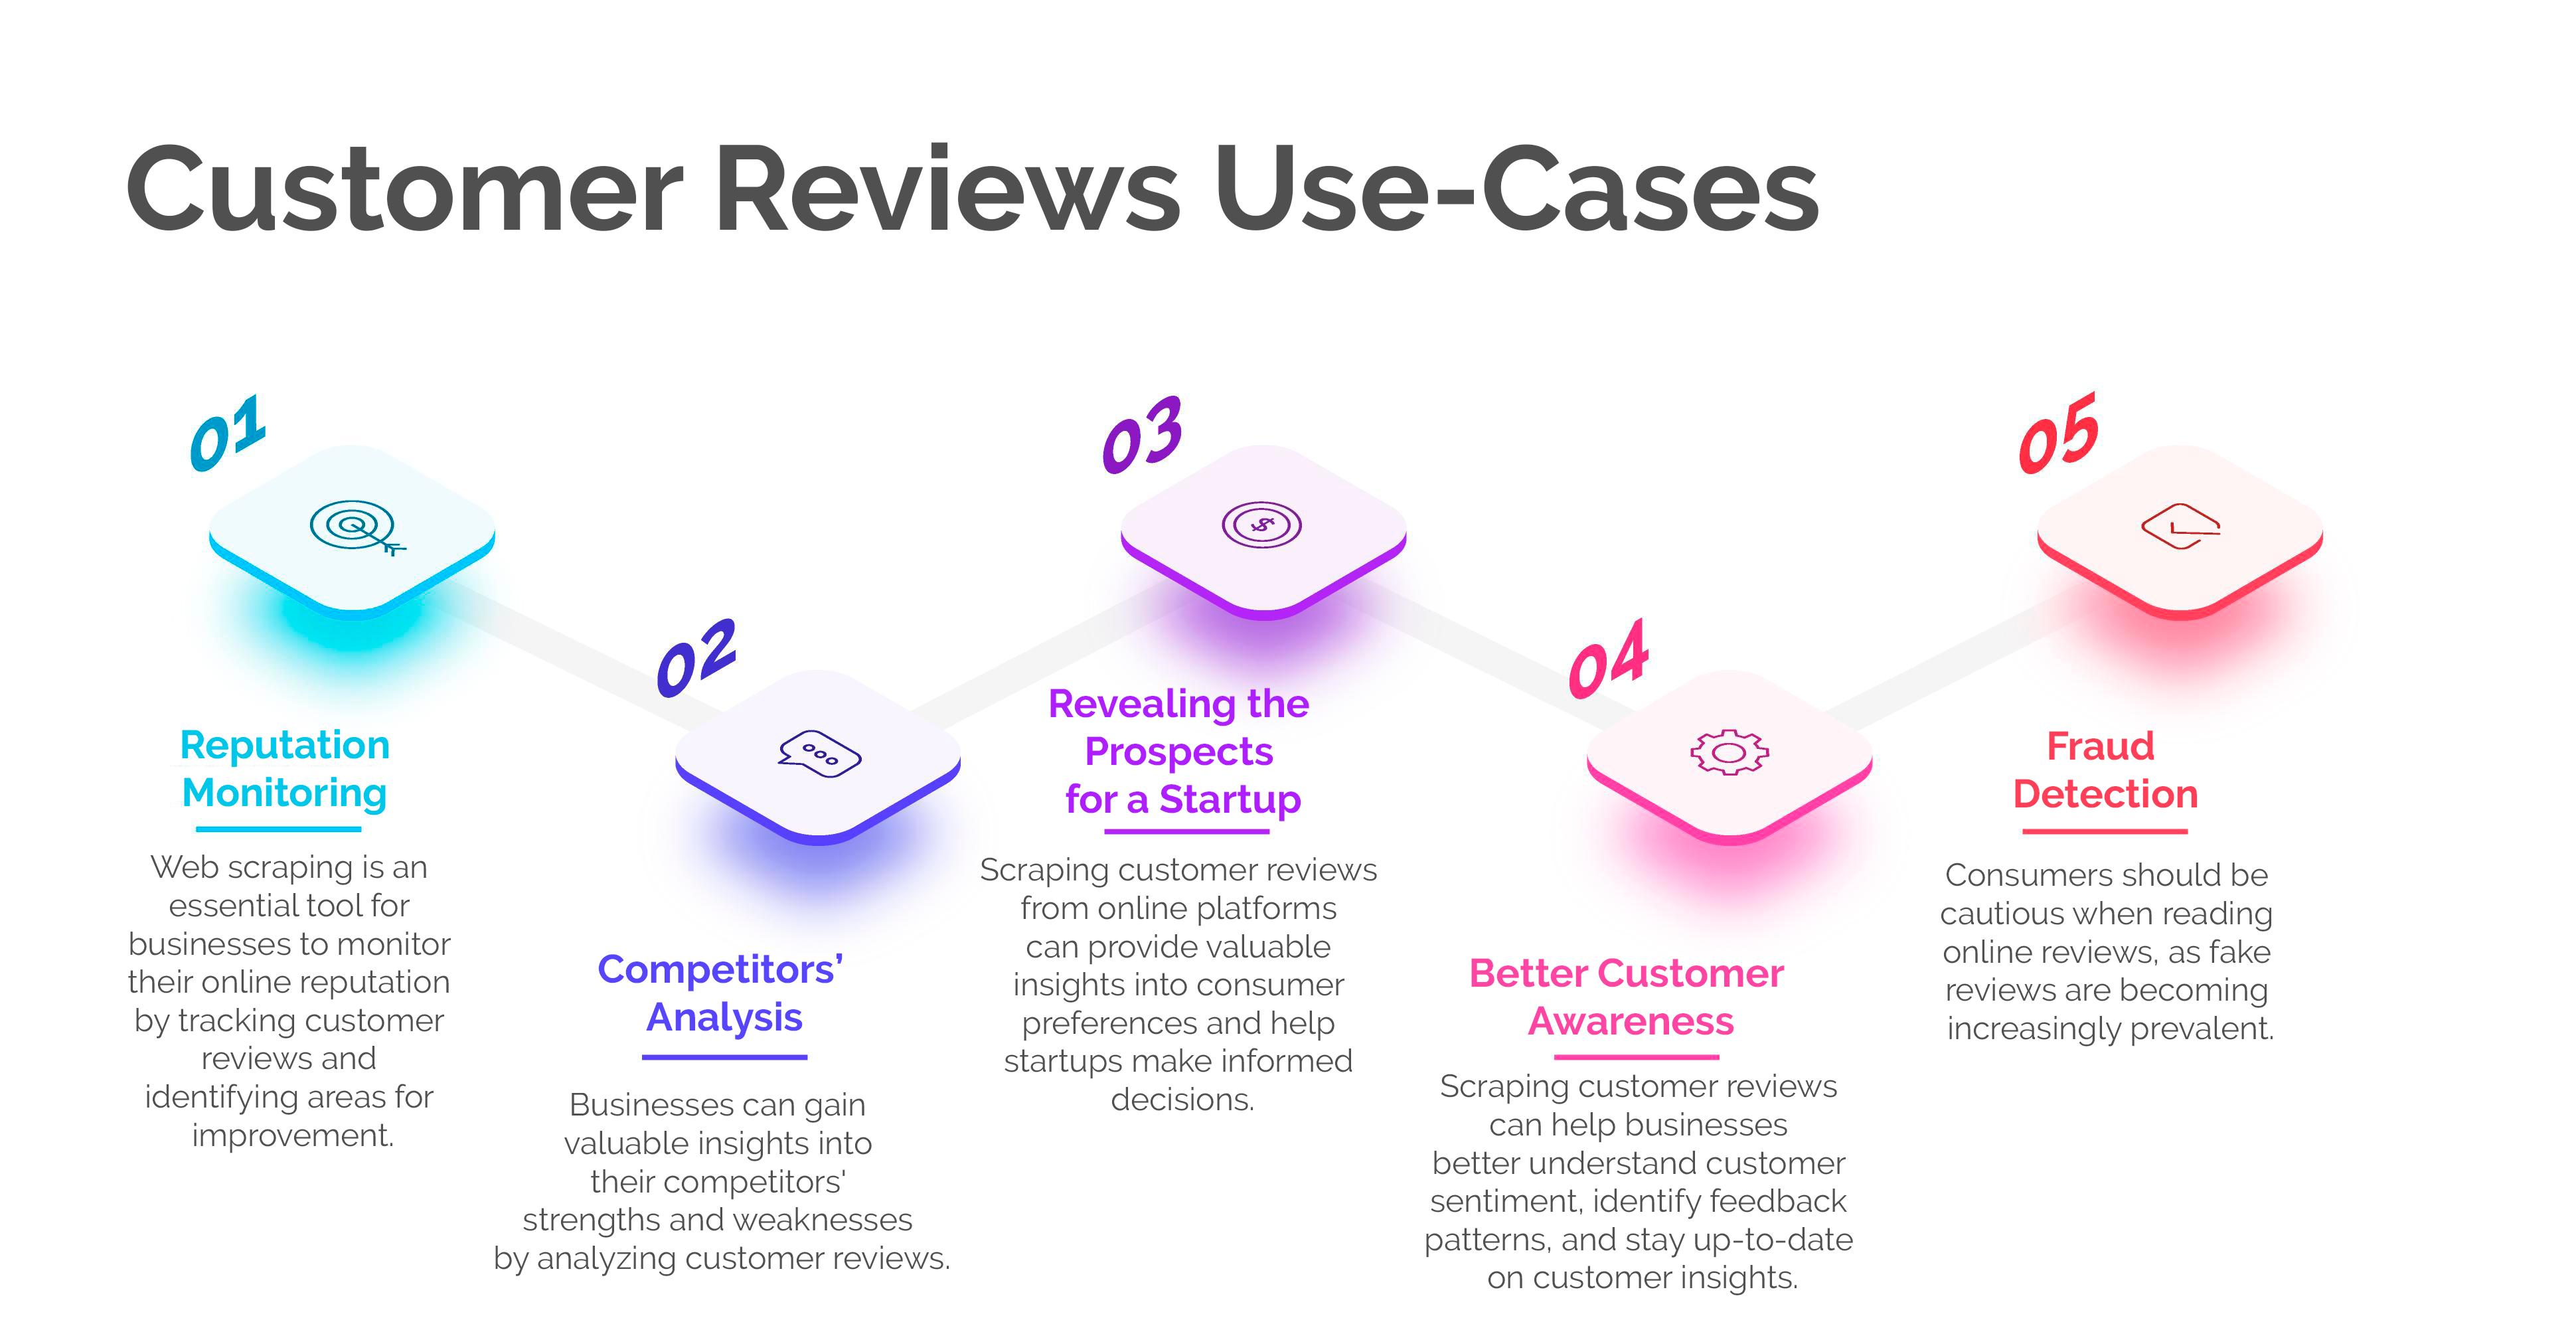 Customer reviews can be a goldmine of information for businesses, but it is important to analyze the data and look for patterns to make meaningful improvements.